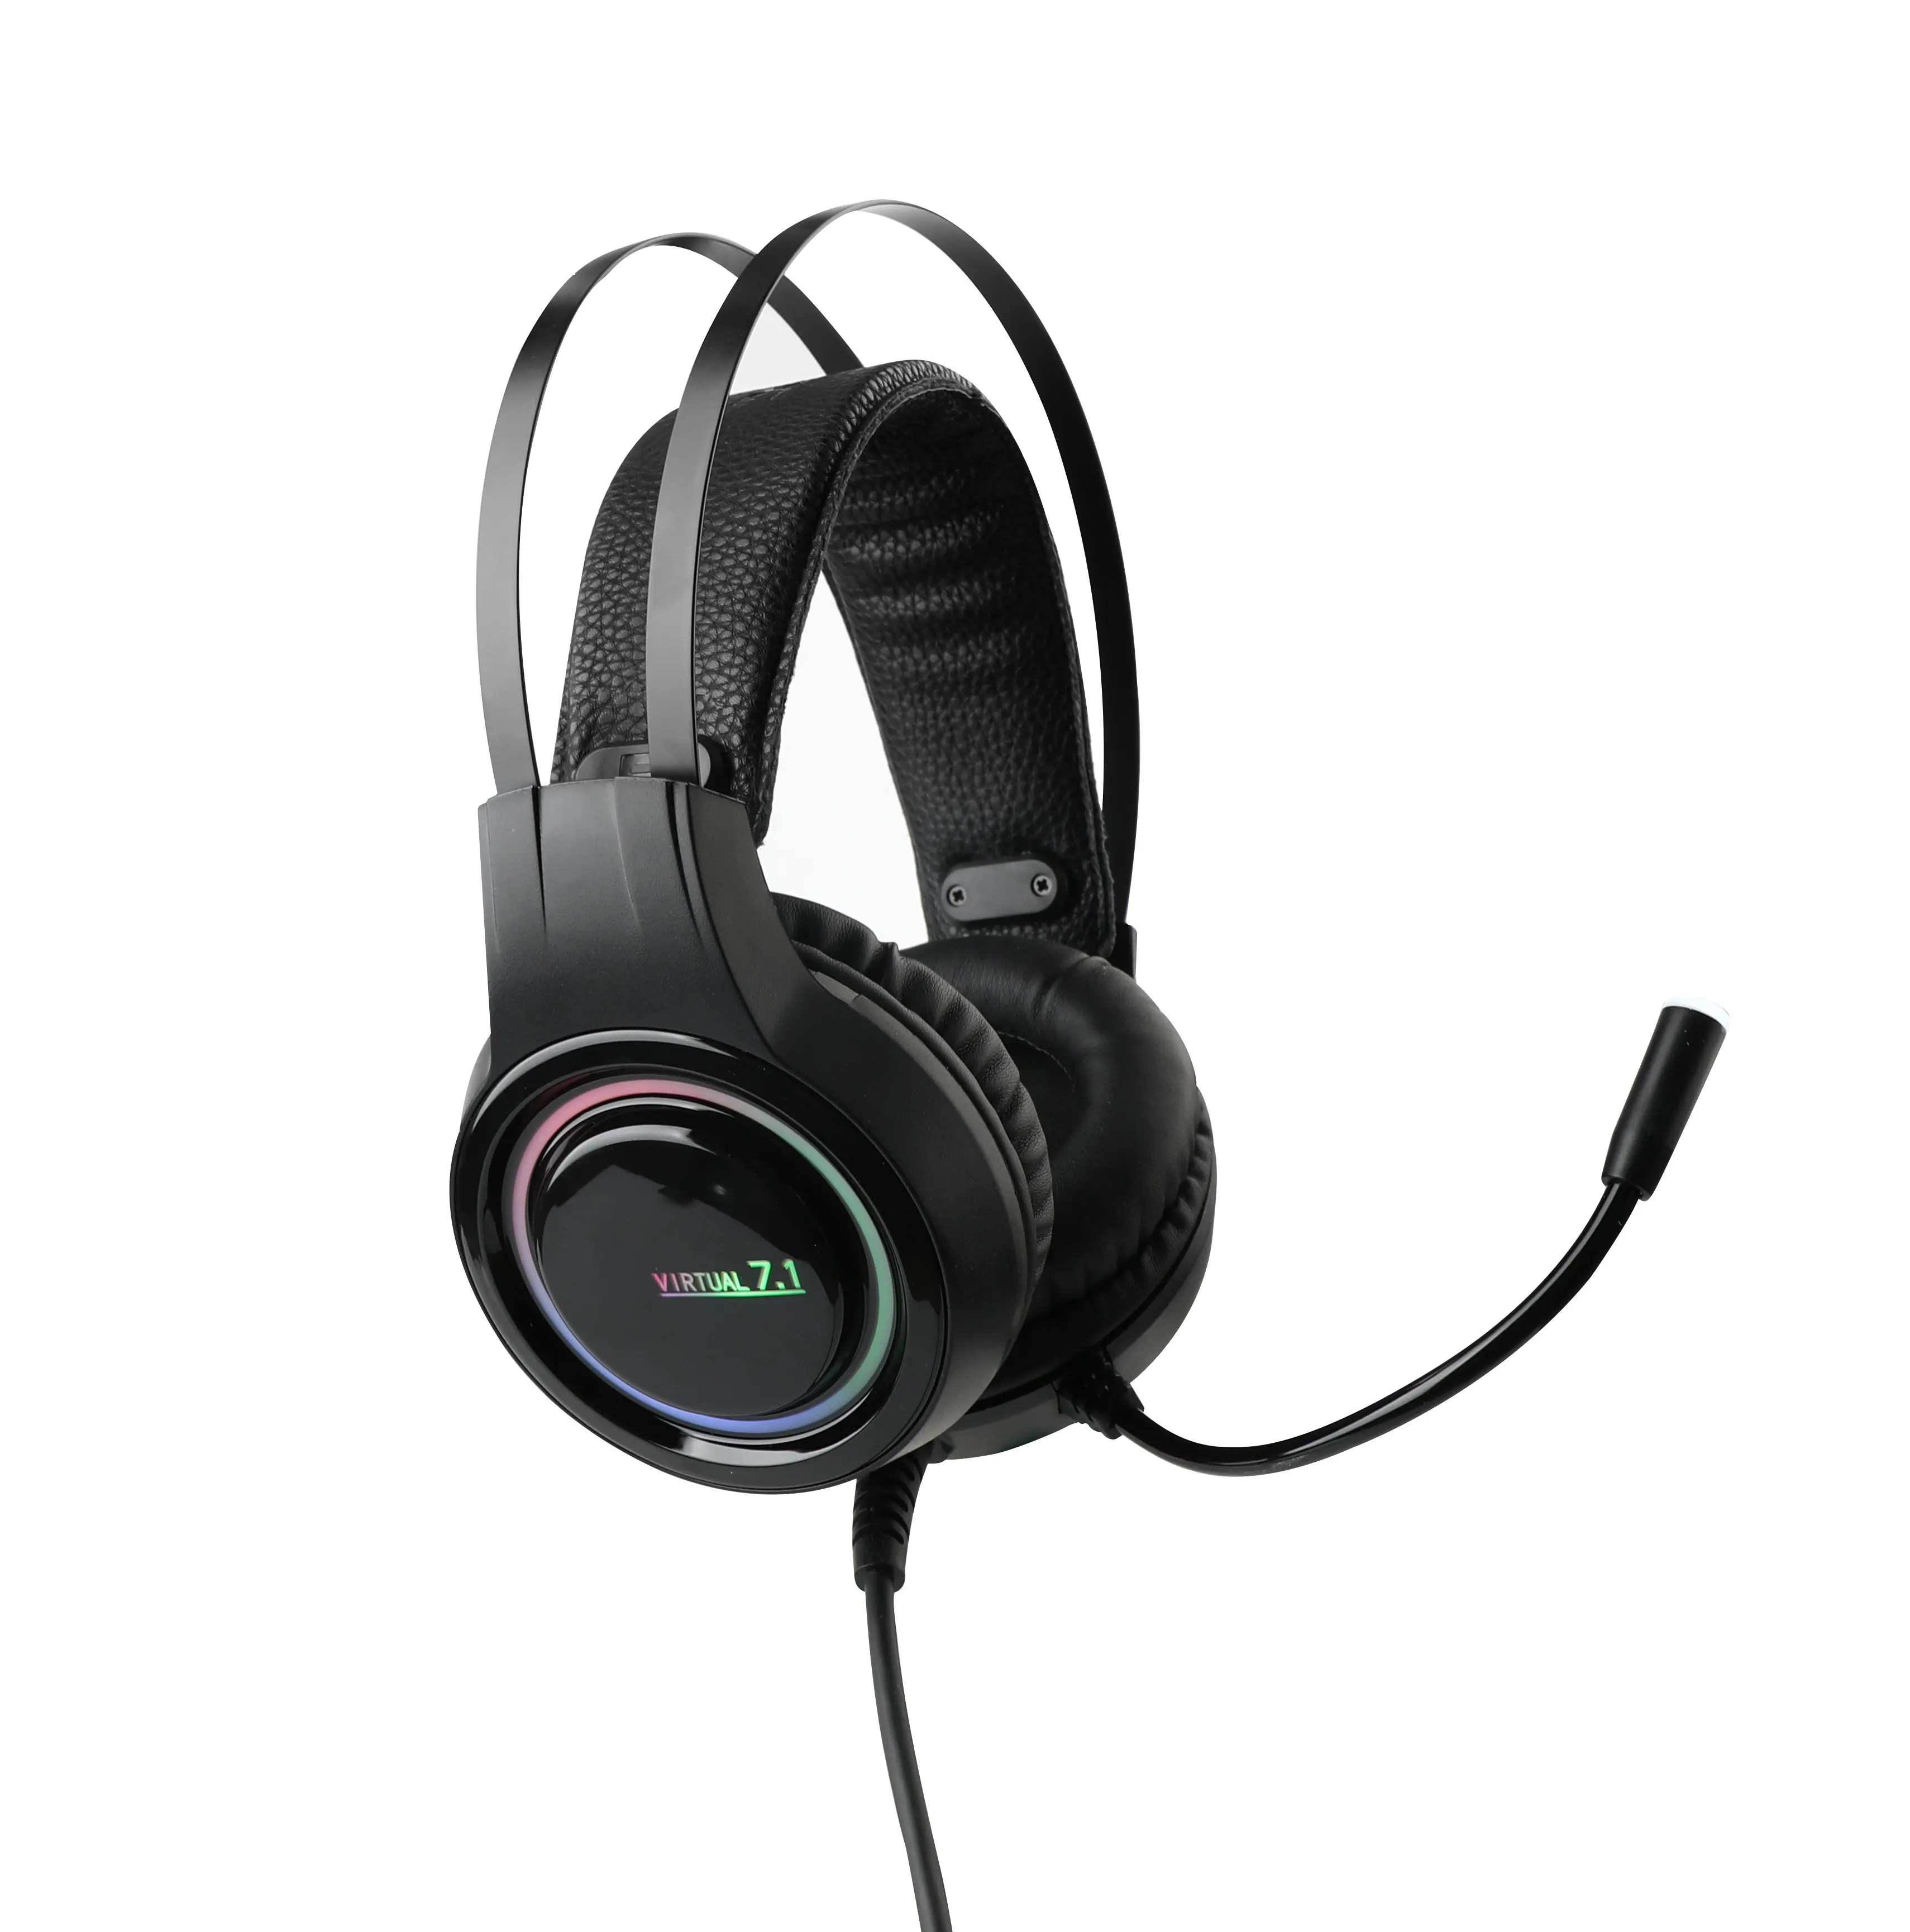 Oem Wired Professional Gaming Headphone 7.1 Virtual Surround Breathing Light USB Game Wired Deep Bass PC Headset With Vibration